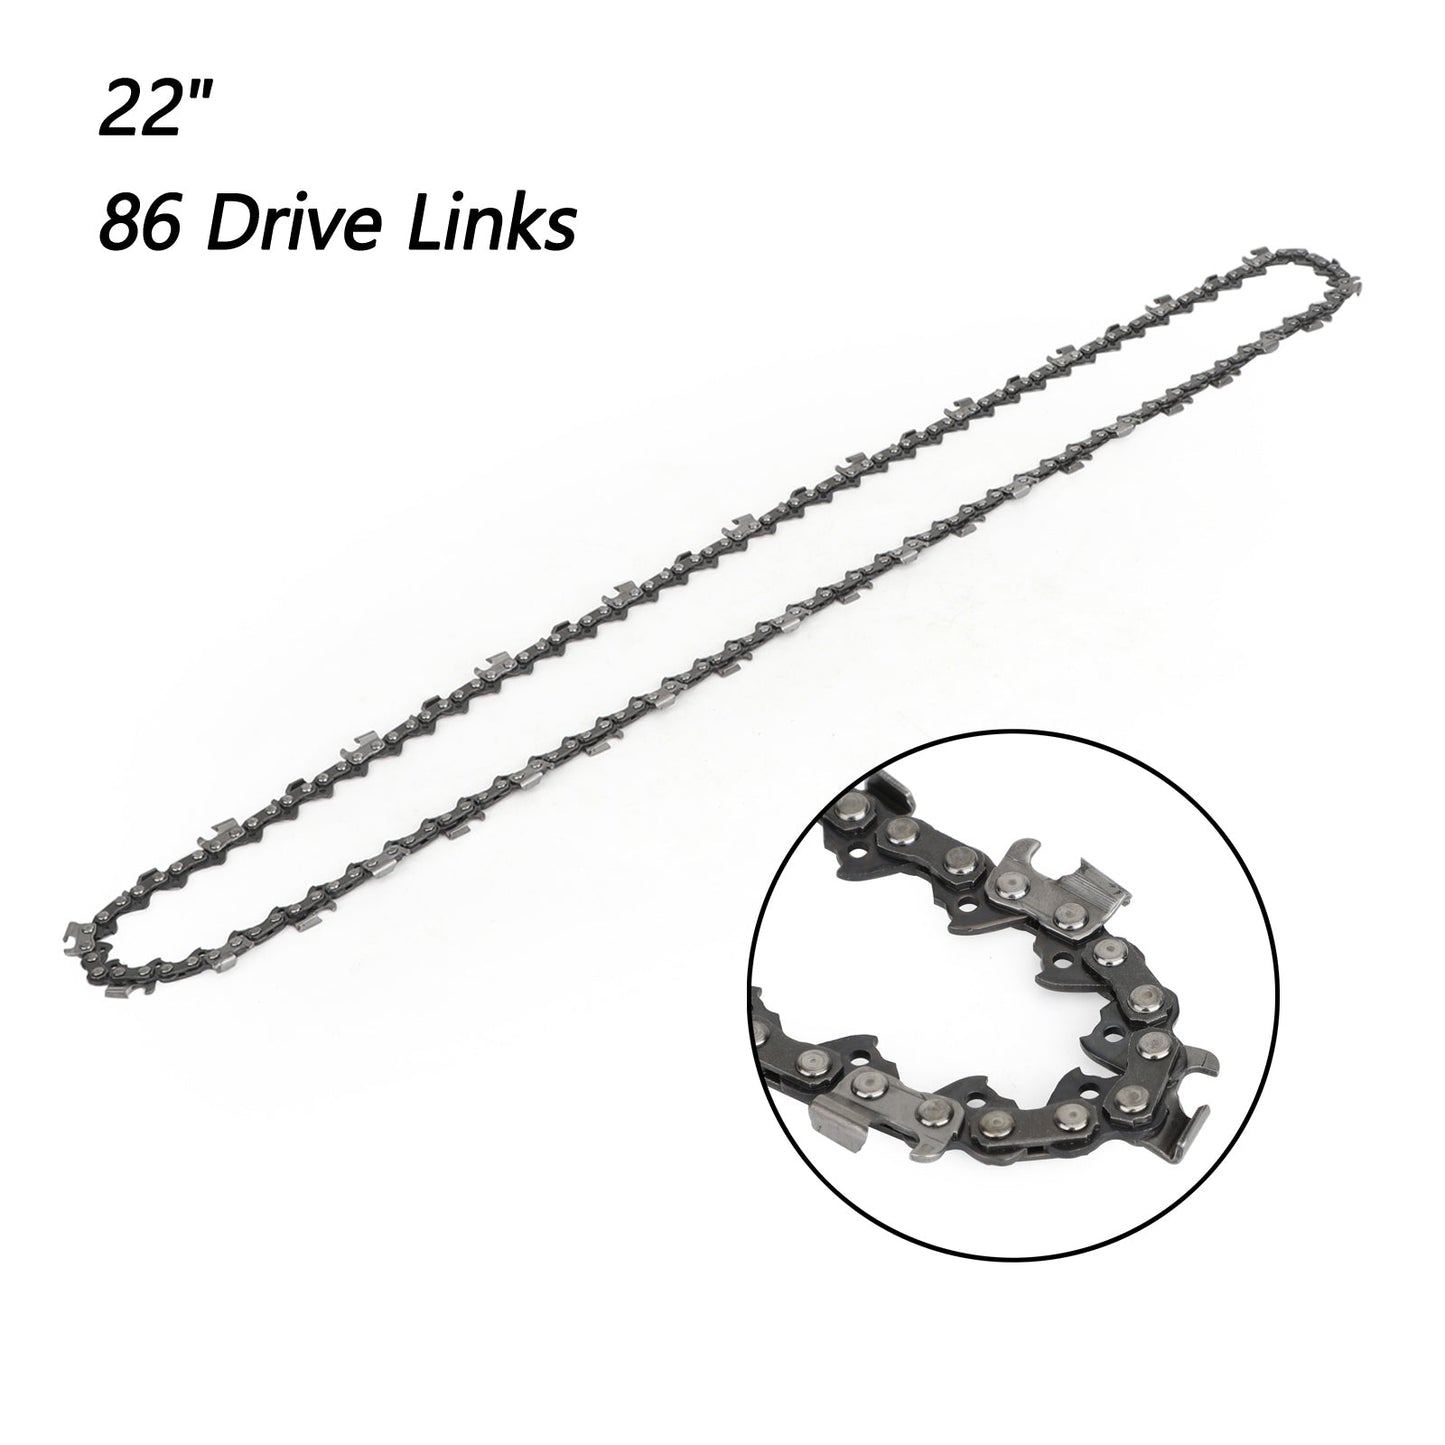 22" Chainsaw Saw Chain 325 pitch .058 gauge 86DL Drive Links Spare Replacement